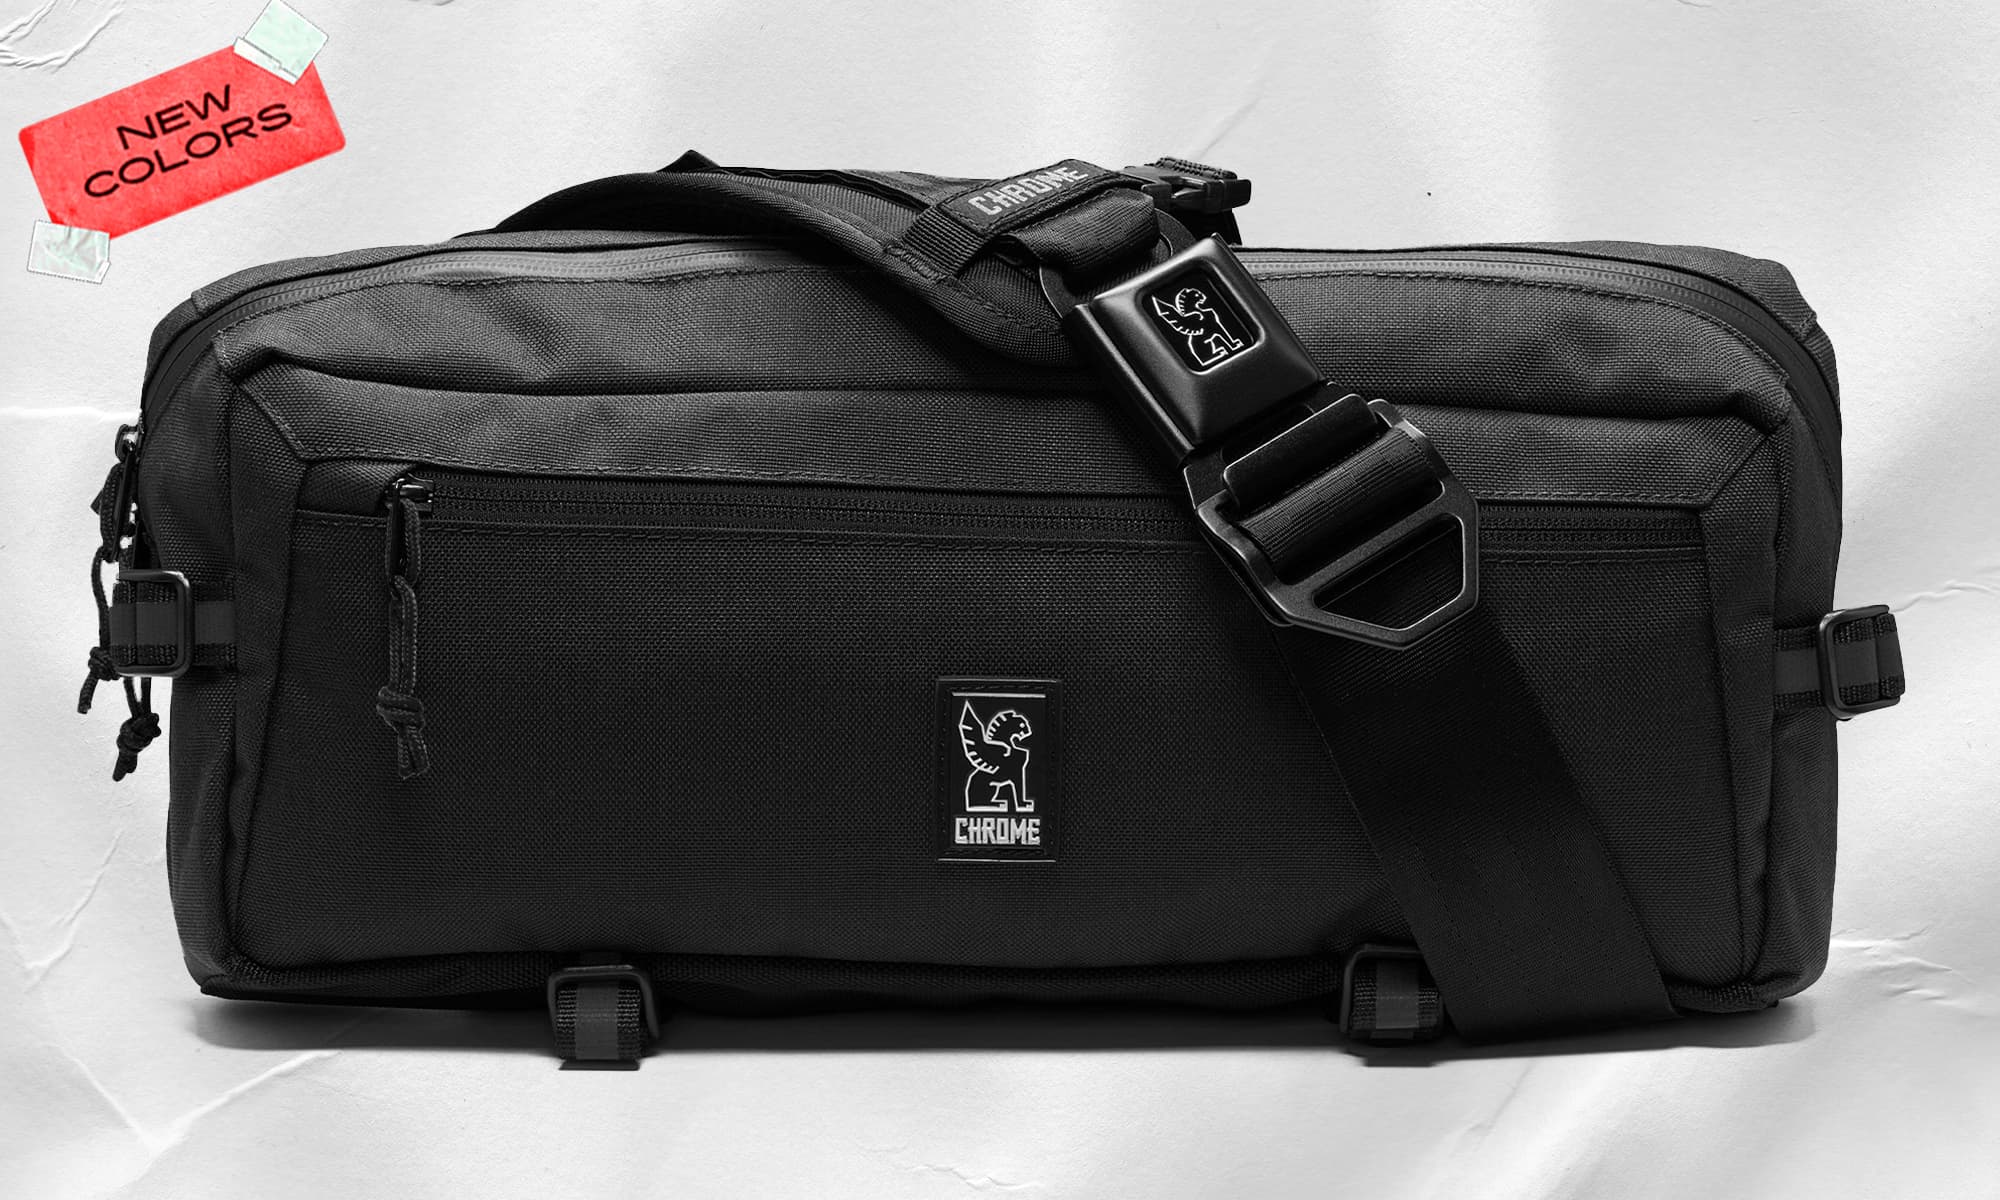 Chrome Bike Bags and Cycling Clothing | Shop now at ROSE